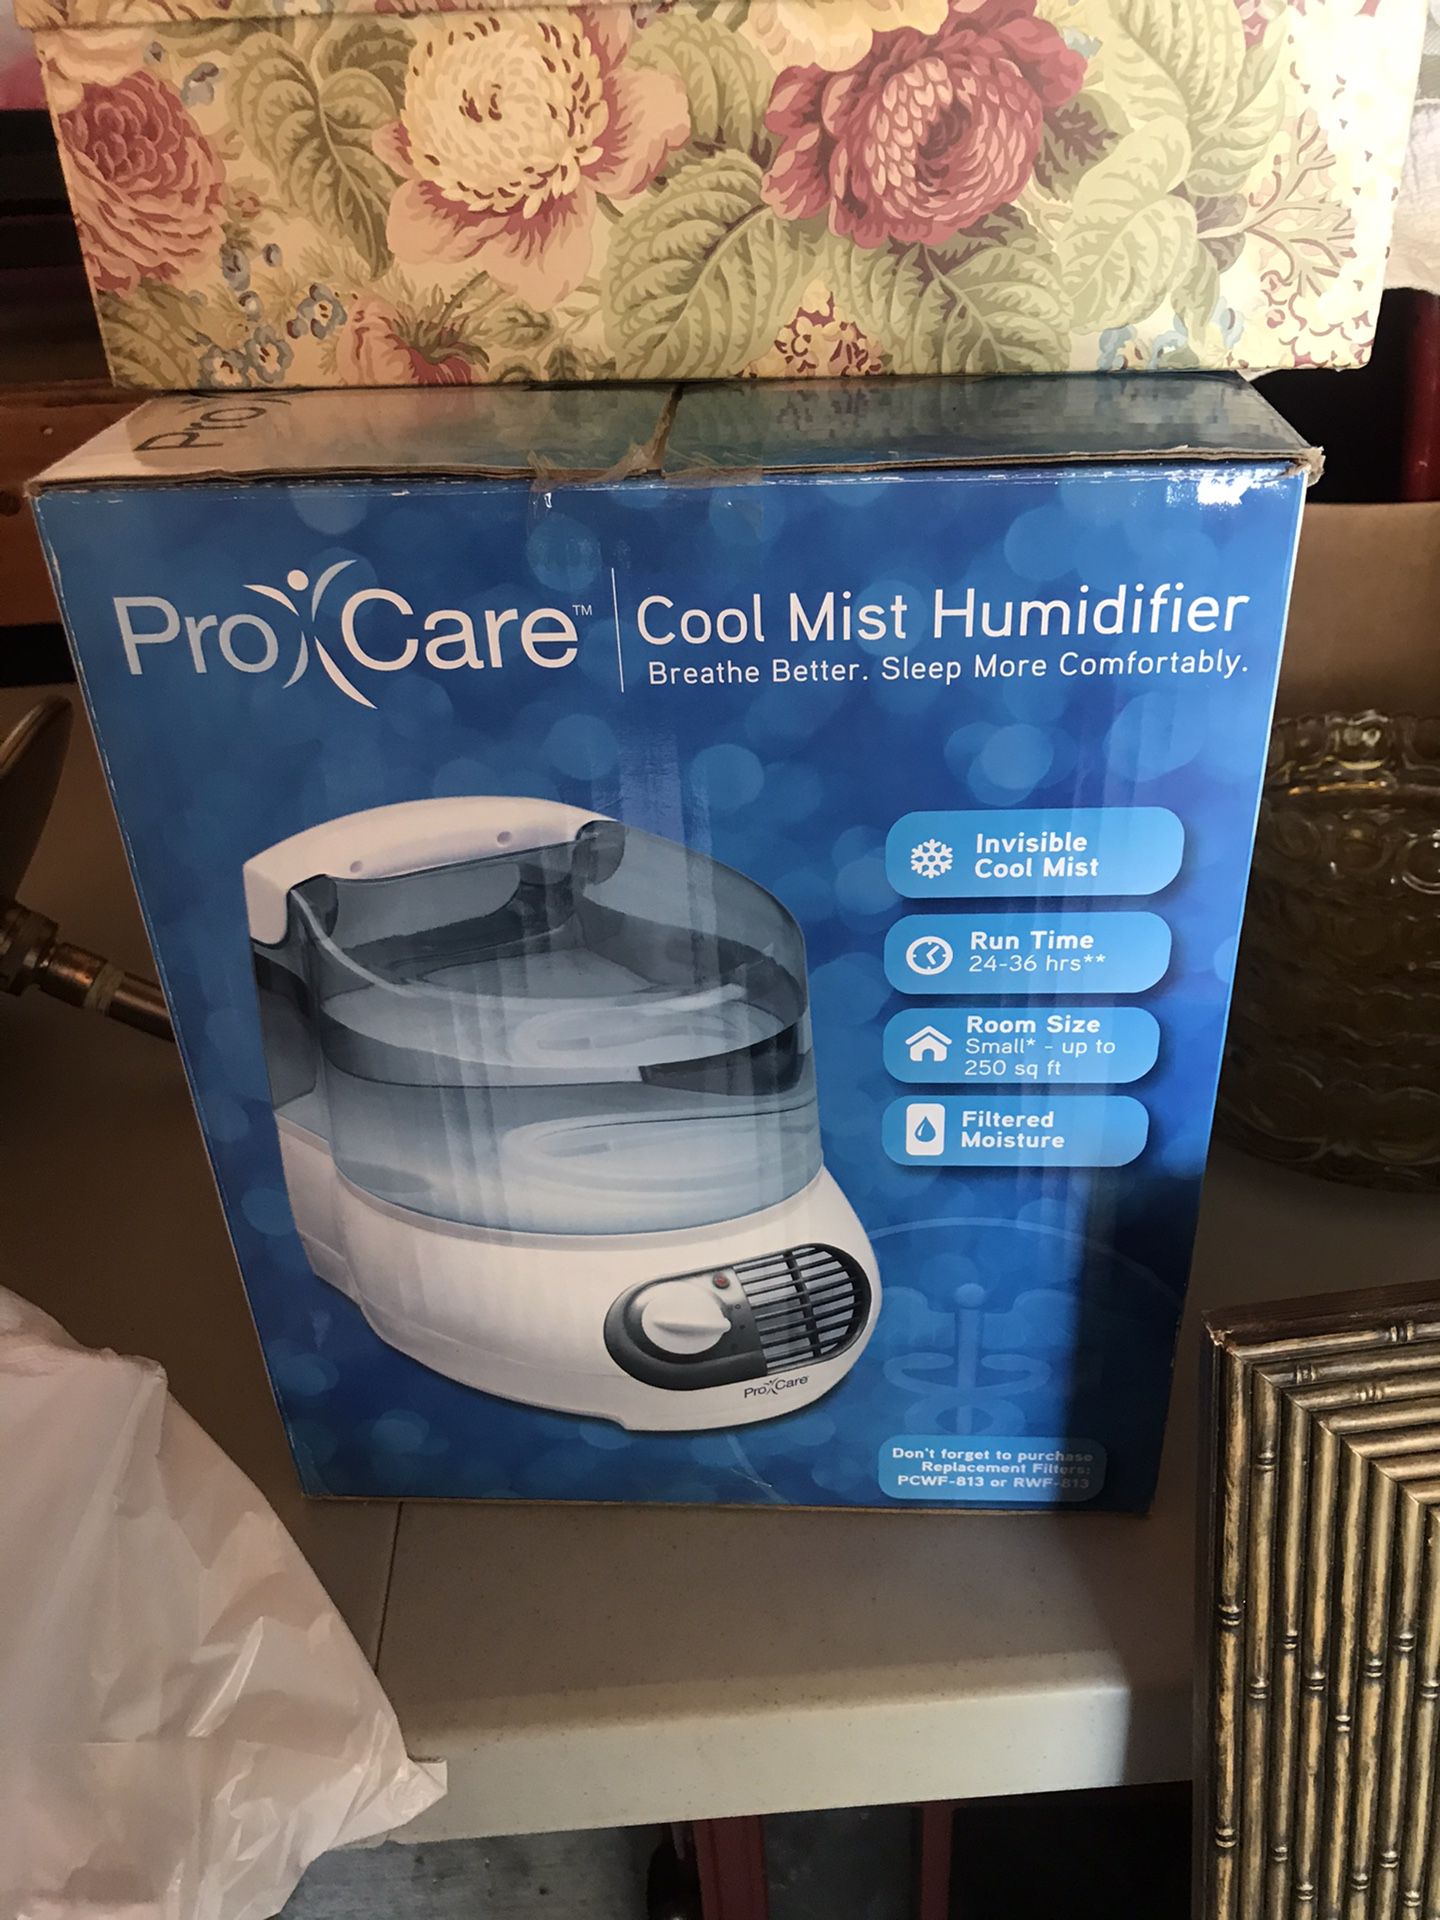 Cool must humidifier